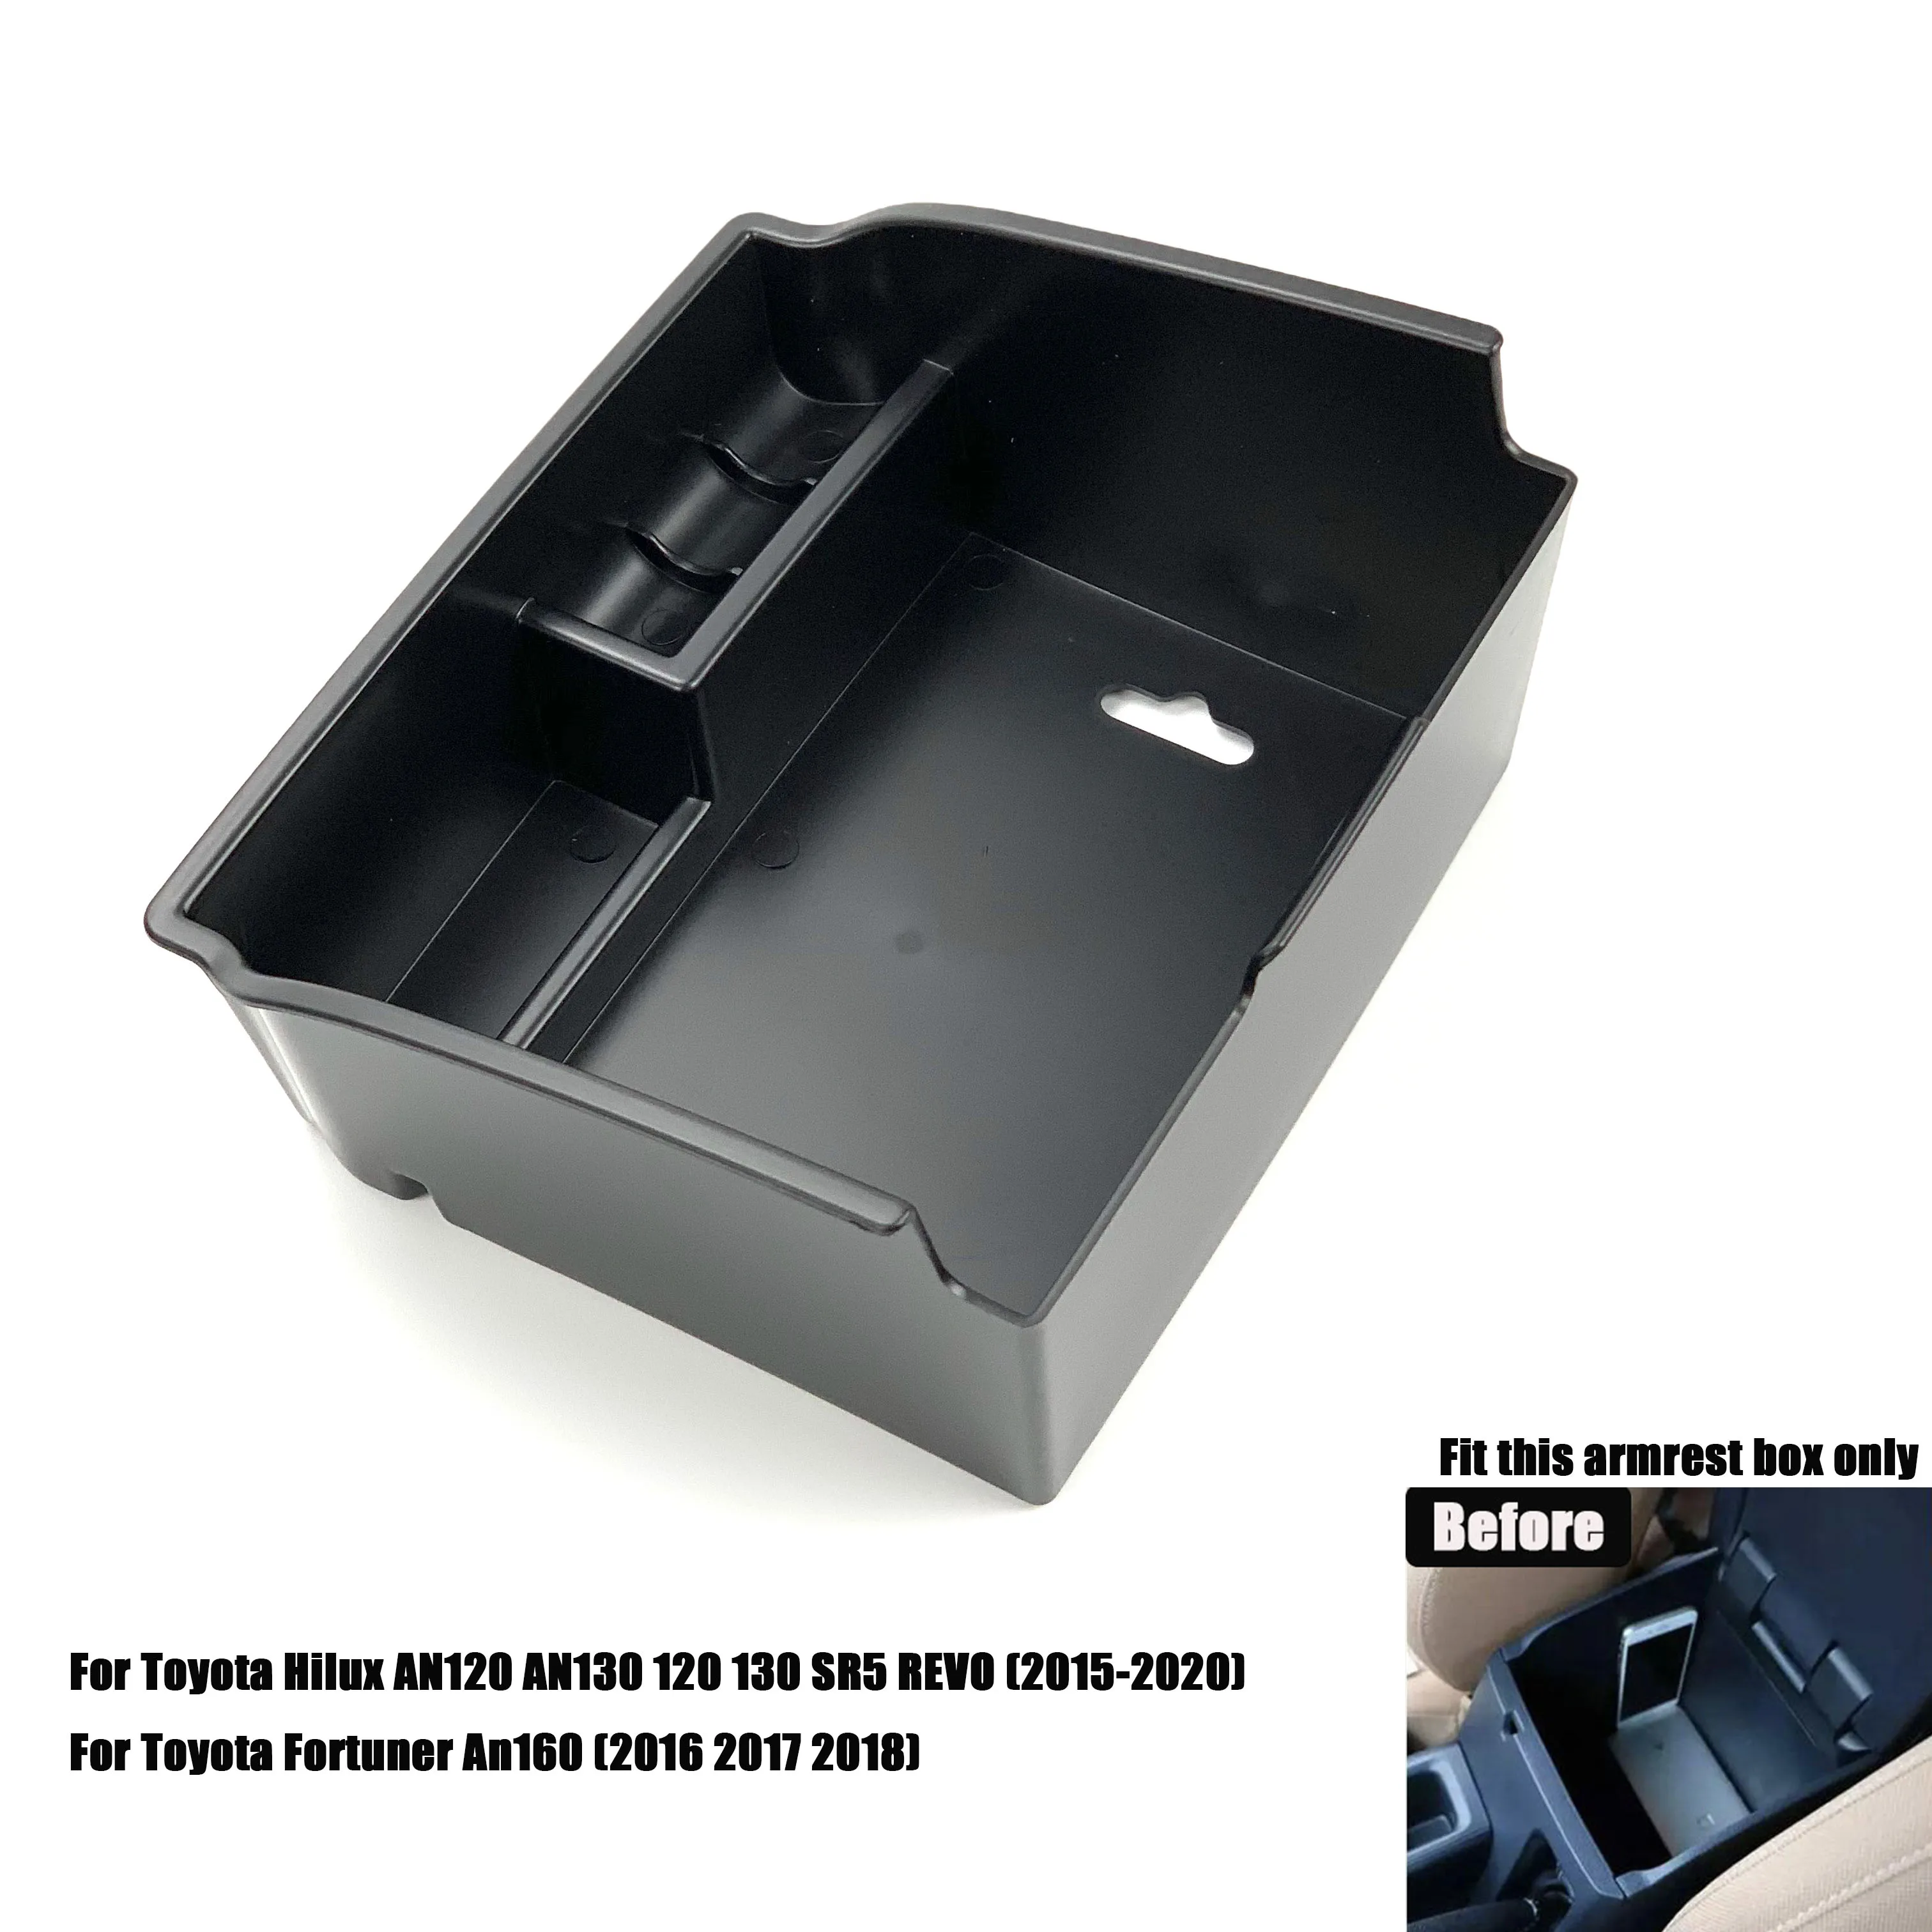 St storage box for toyota hilux an120 an130 toyota fortuner an160 2016 2018 accessories thumb200